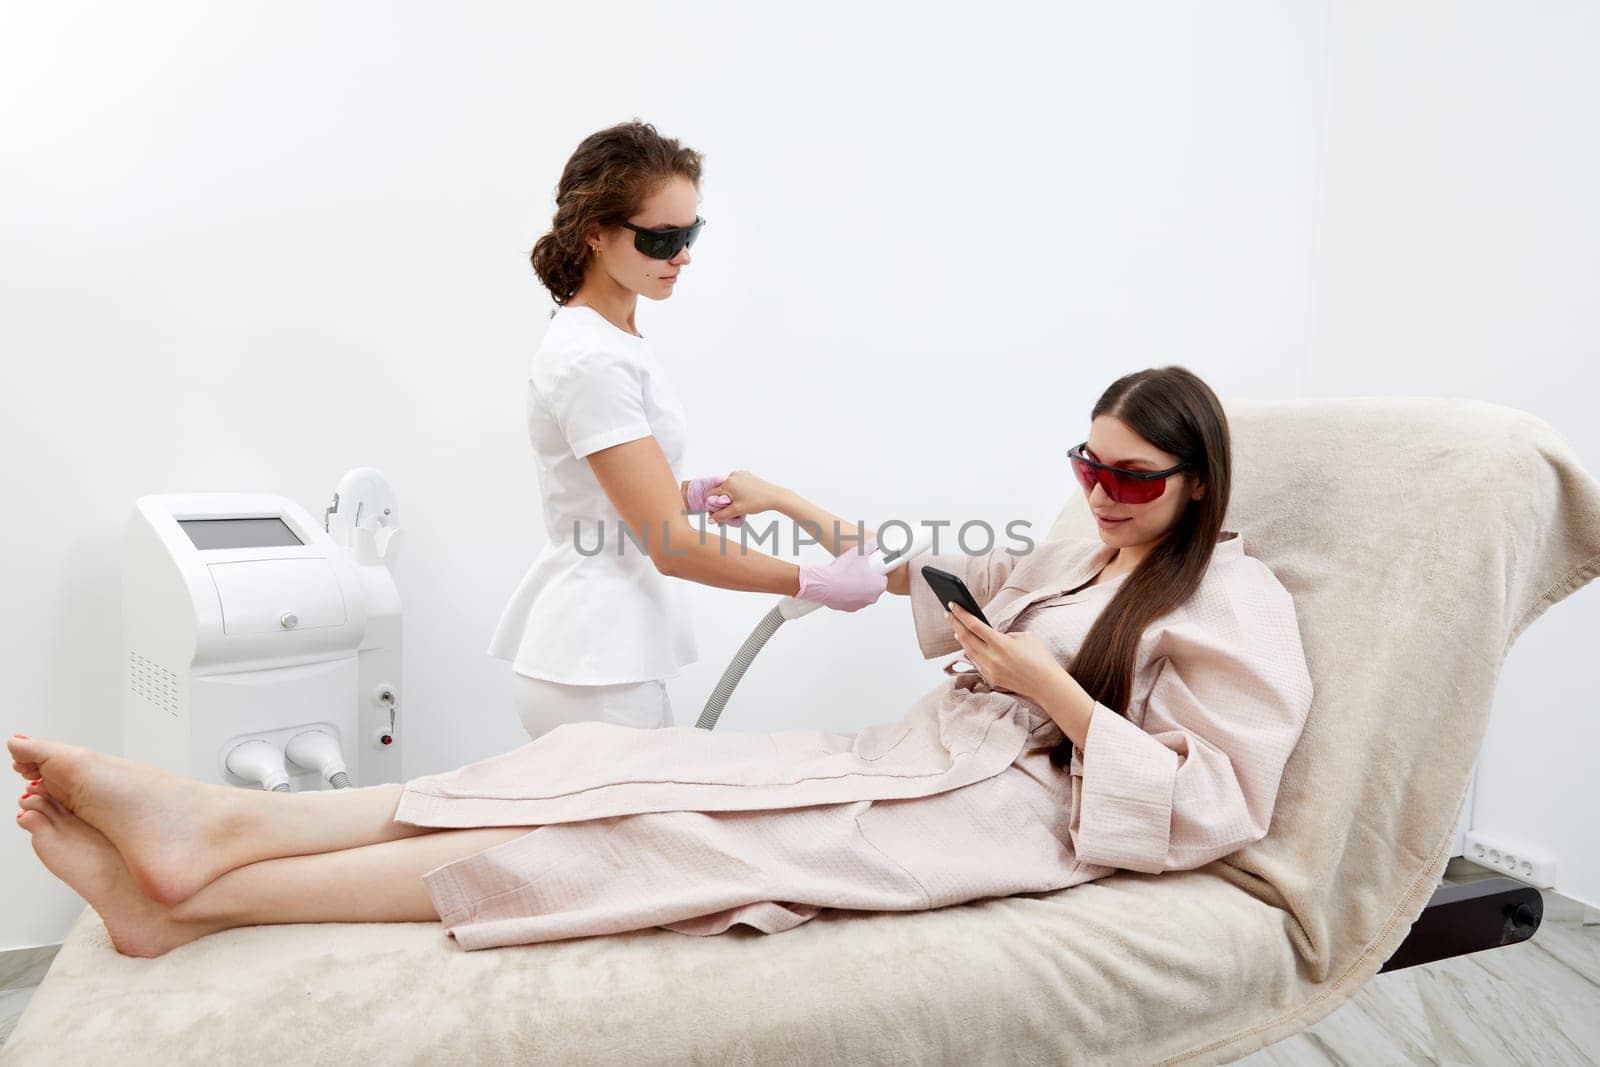 In a serene salon, woman enjoys arm hair removal using laser technology by Mariakray